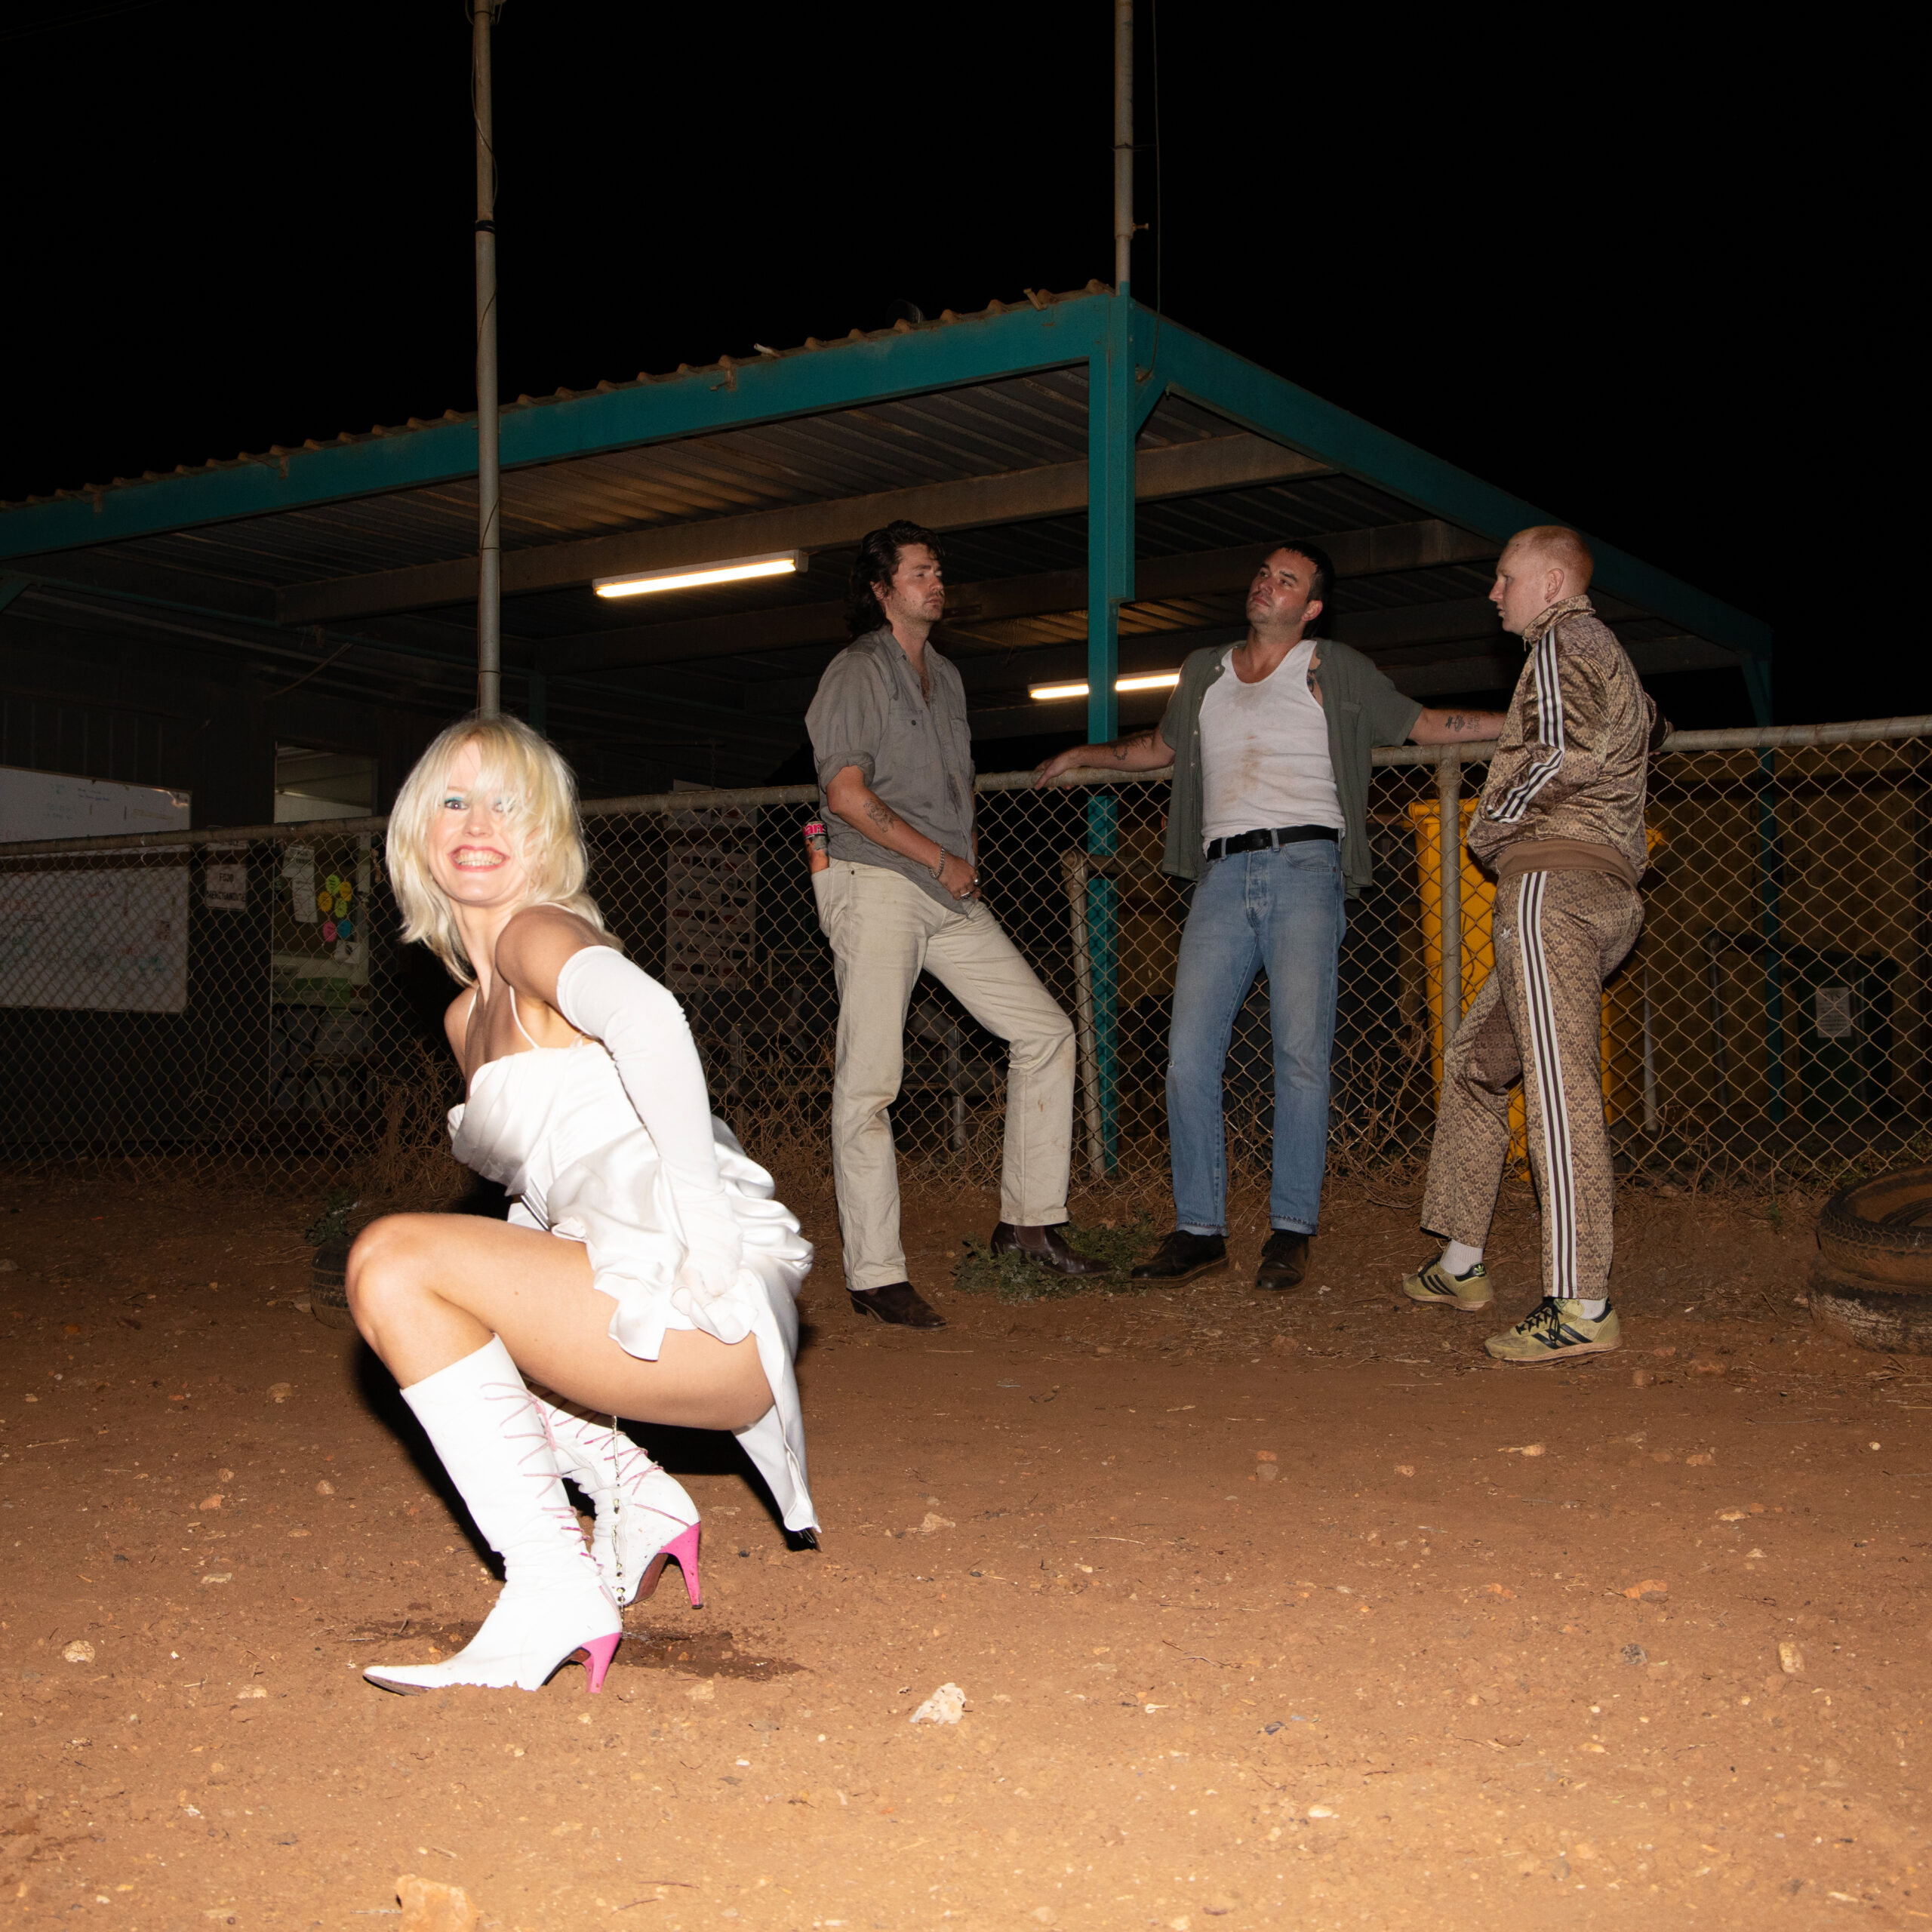 Etiquette AMYL & THE SNIFFERS – U SHOULD NOT BE DOING THAT – 7 »